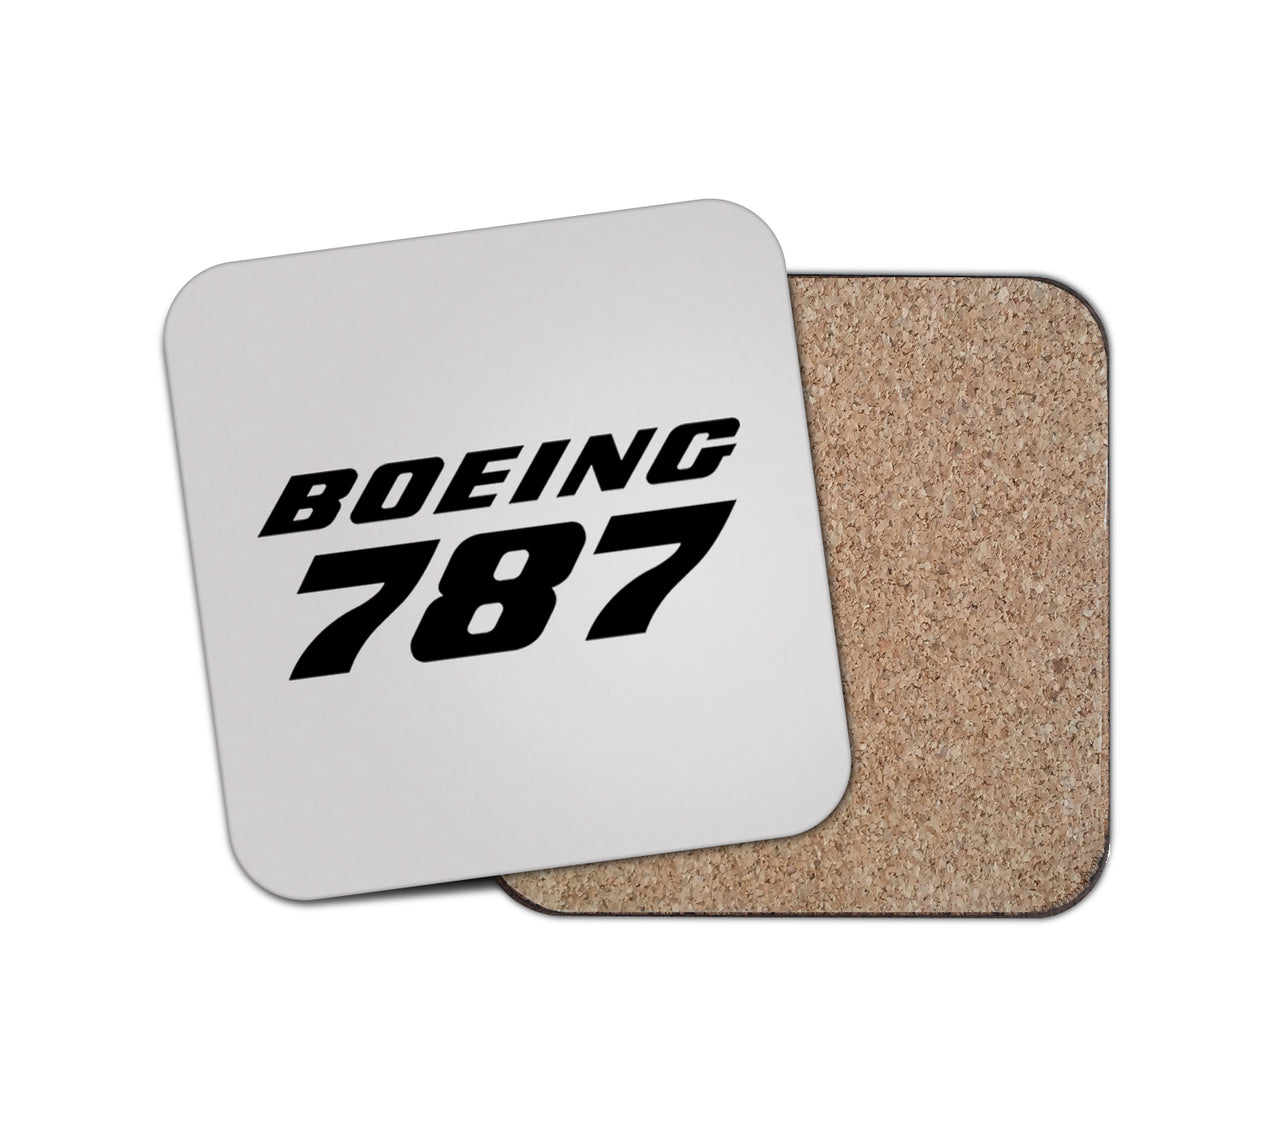 Boeing 787 & Text Designed Coasters